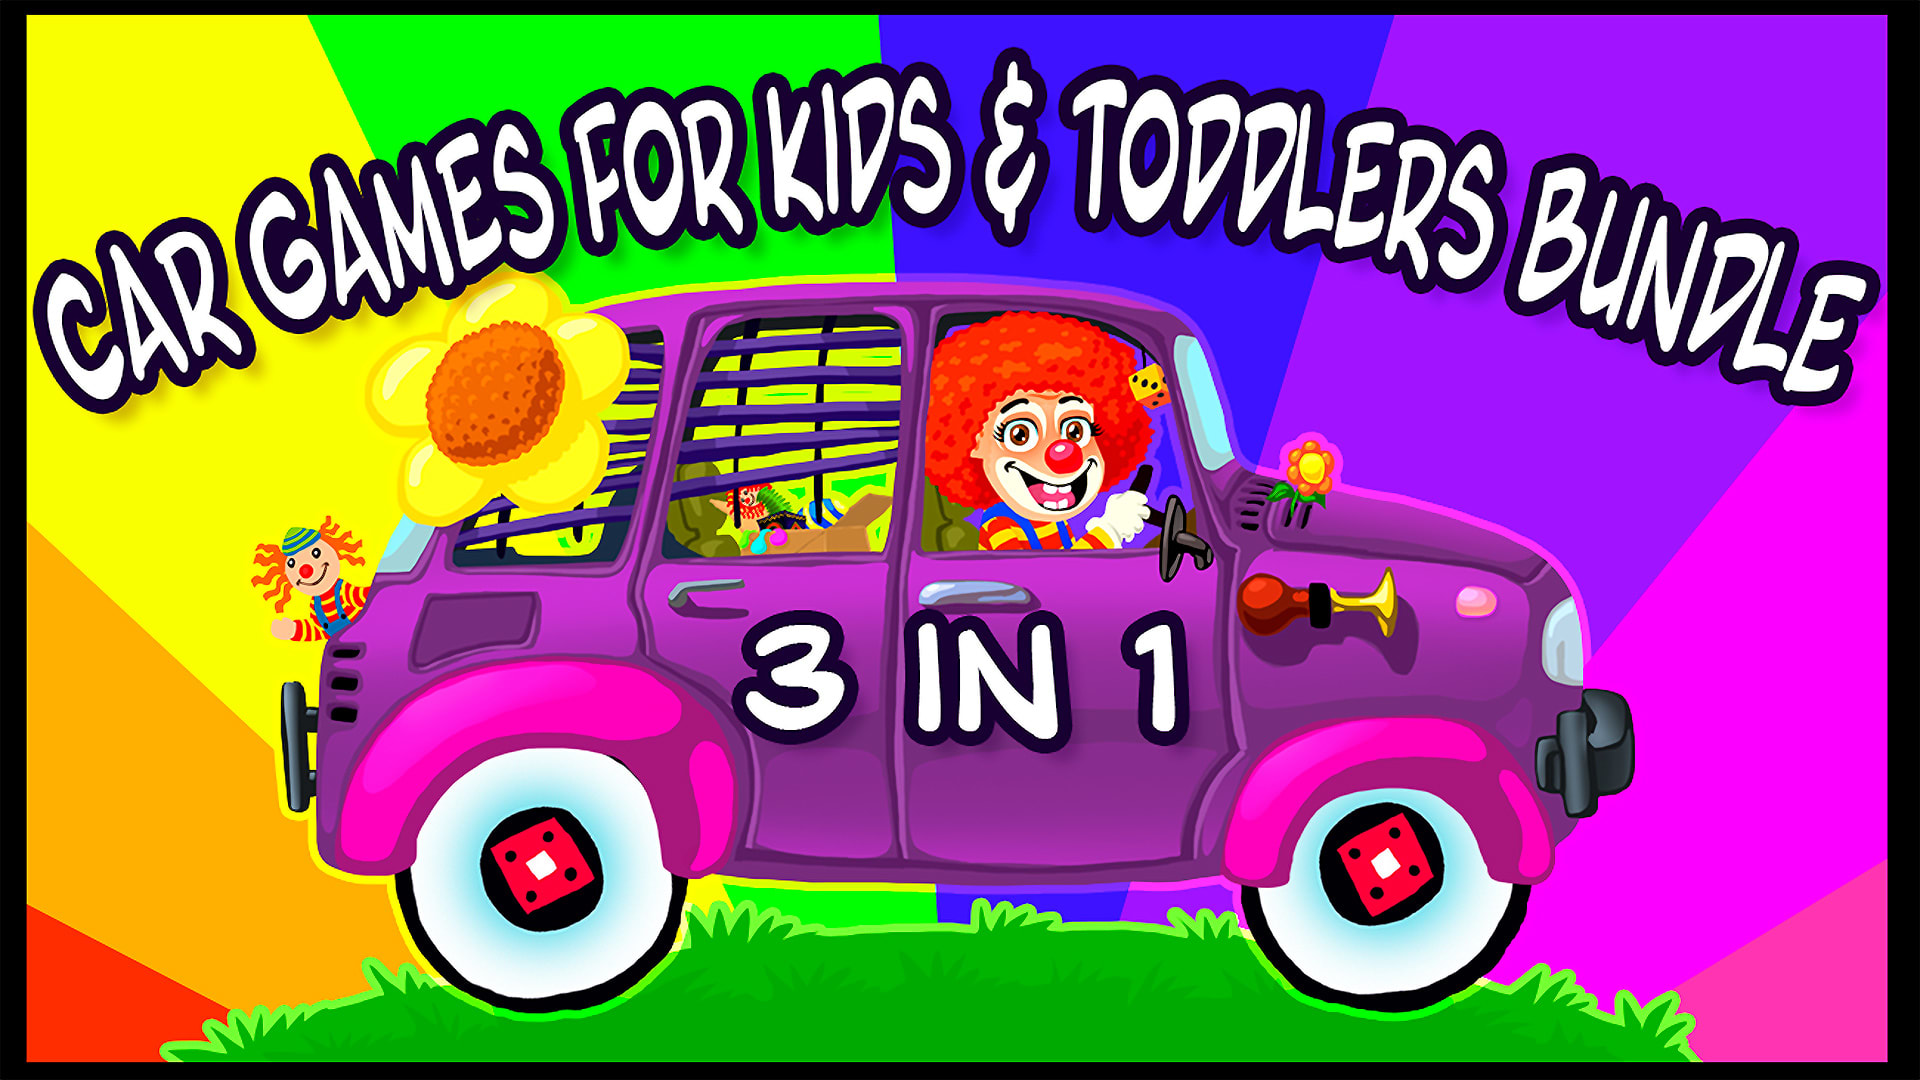 Car Games for Kids & Toddlers Bundle 3 in 1